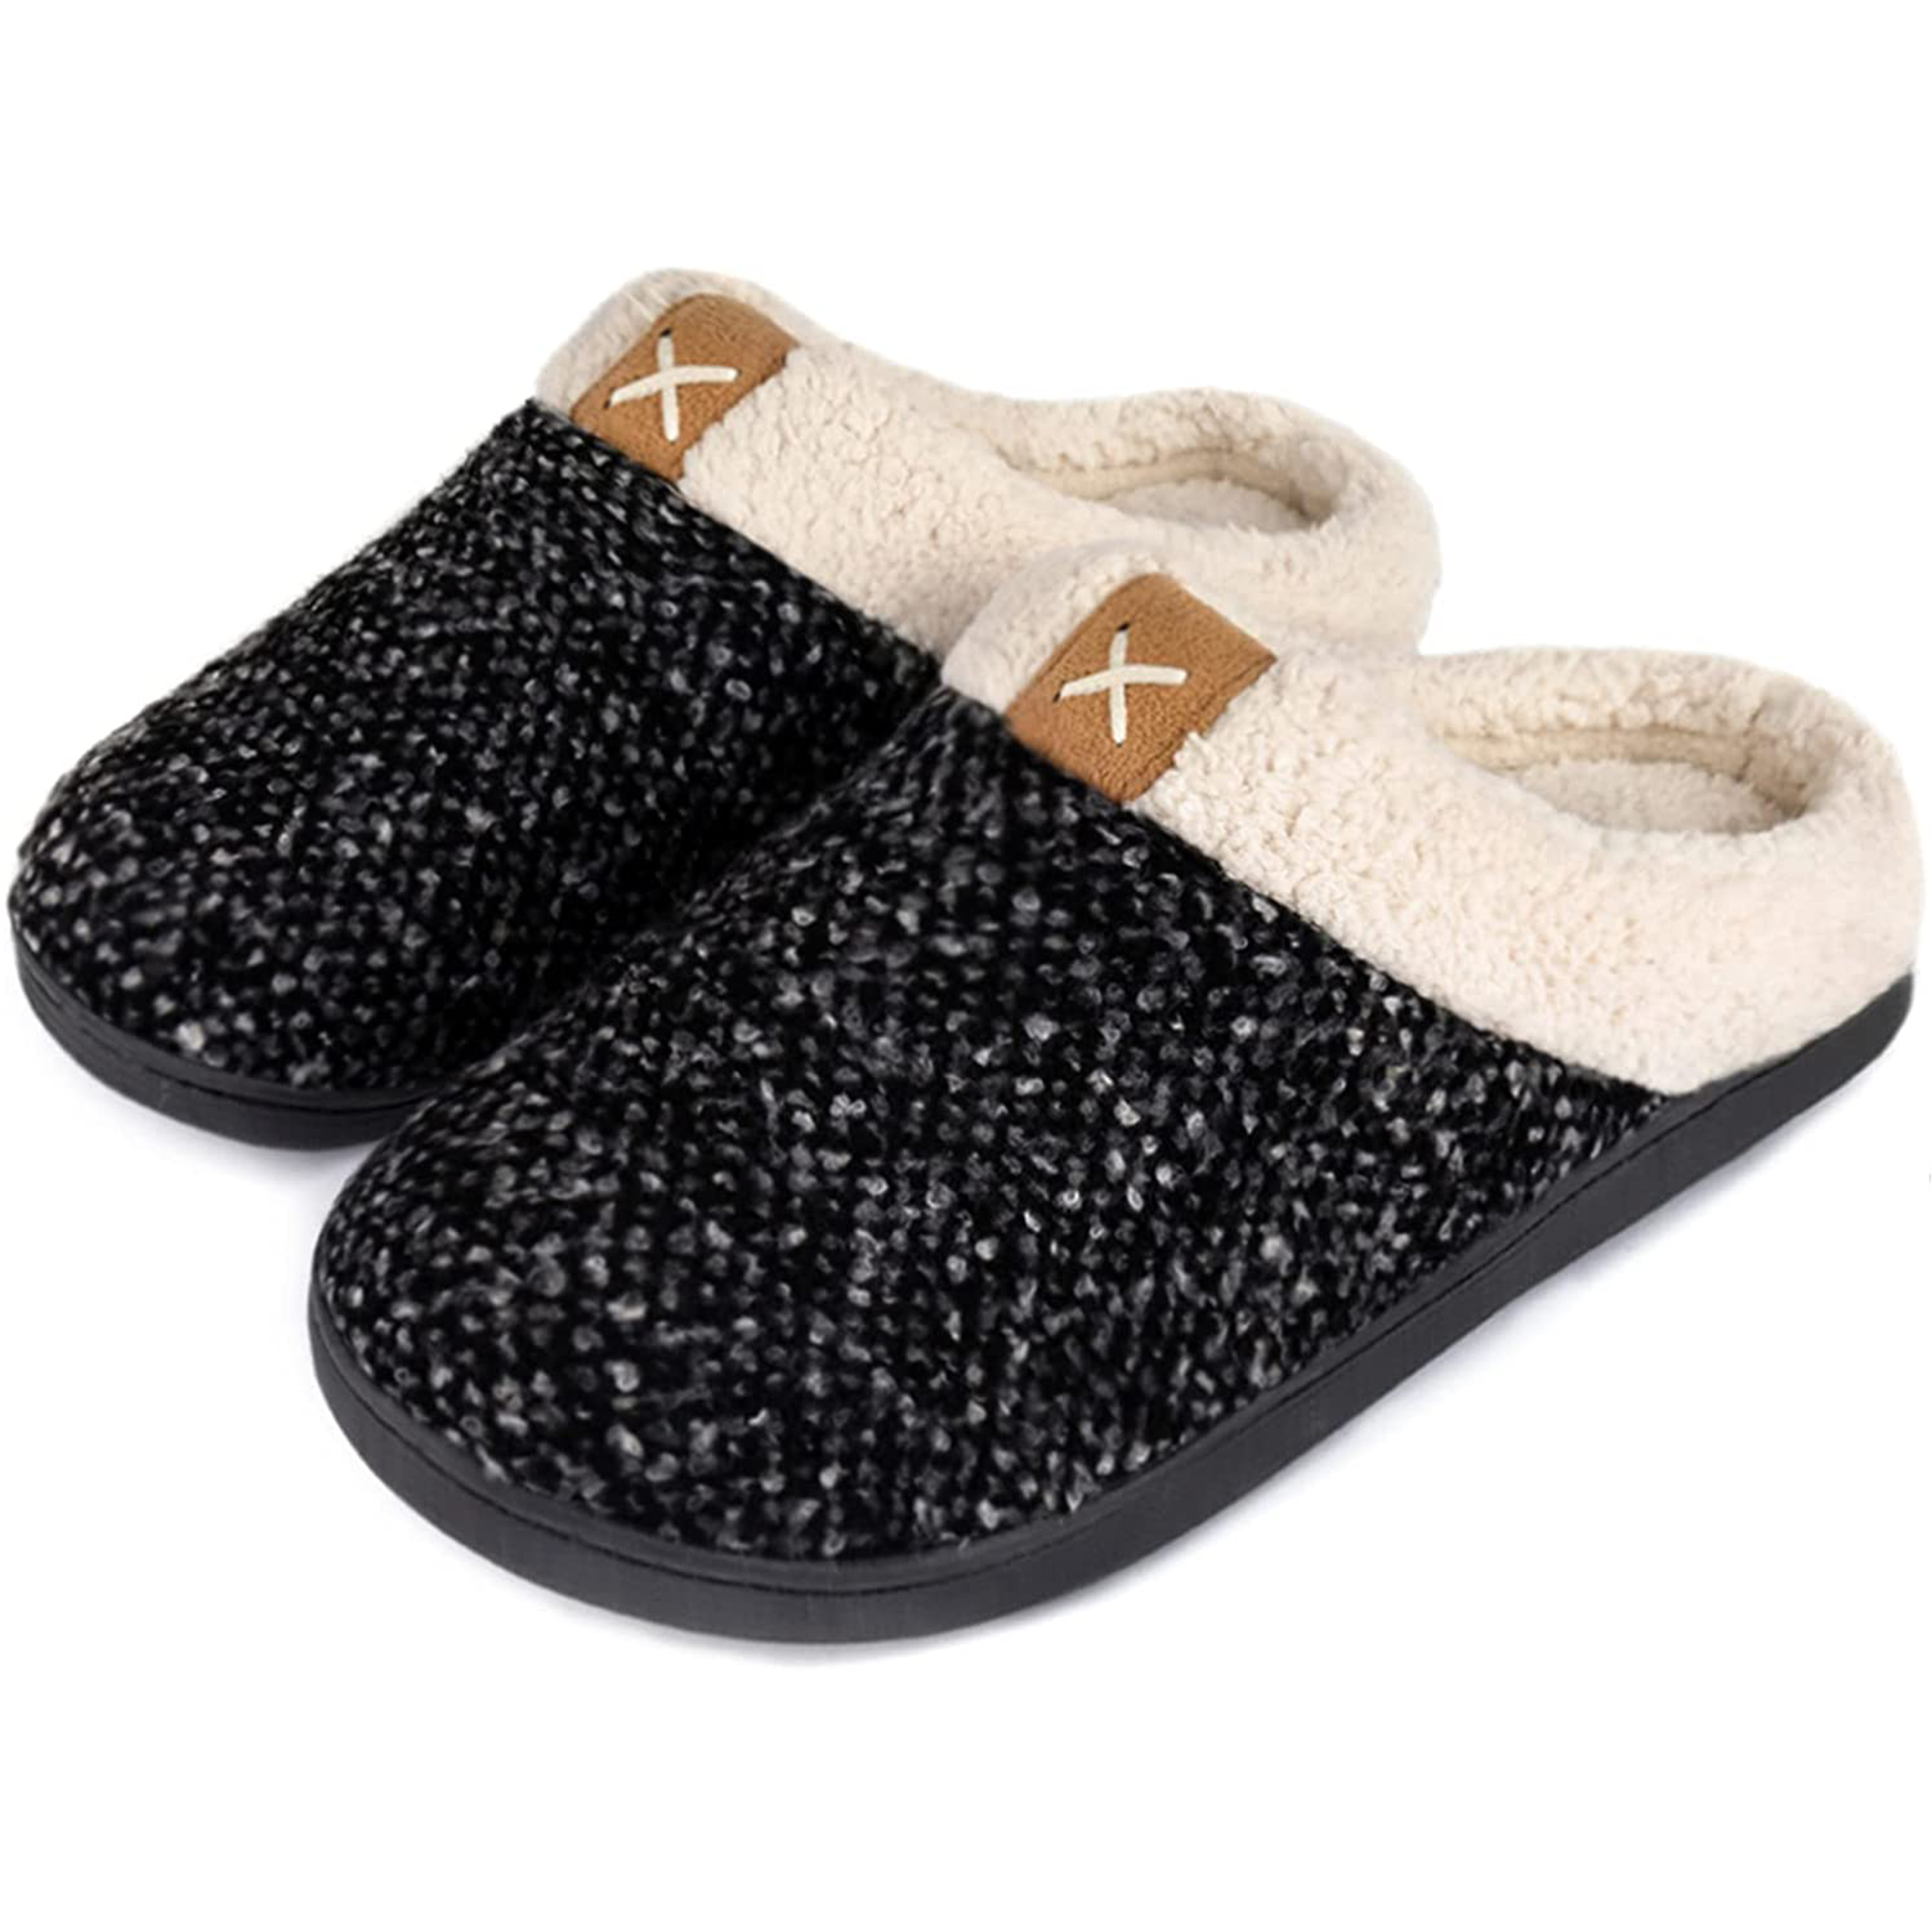 Men's Cozy Memory Foam Slippers with Fuzzy Plush Wool-Like Lining, Slip on Clog House Shoes with Indoor Outdoor Anti-Skid Rubber Sole - image 1 of 5